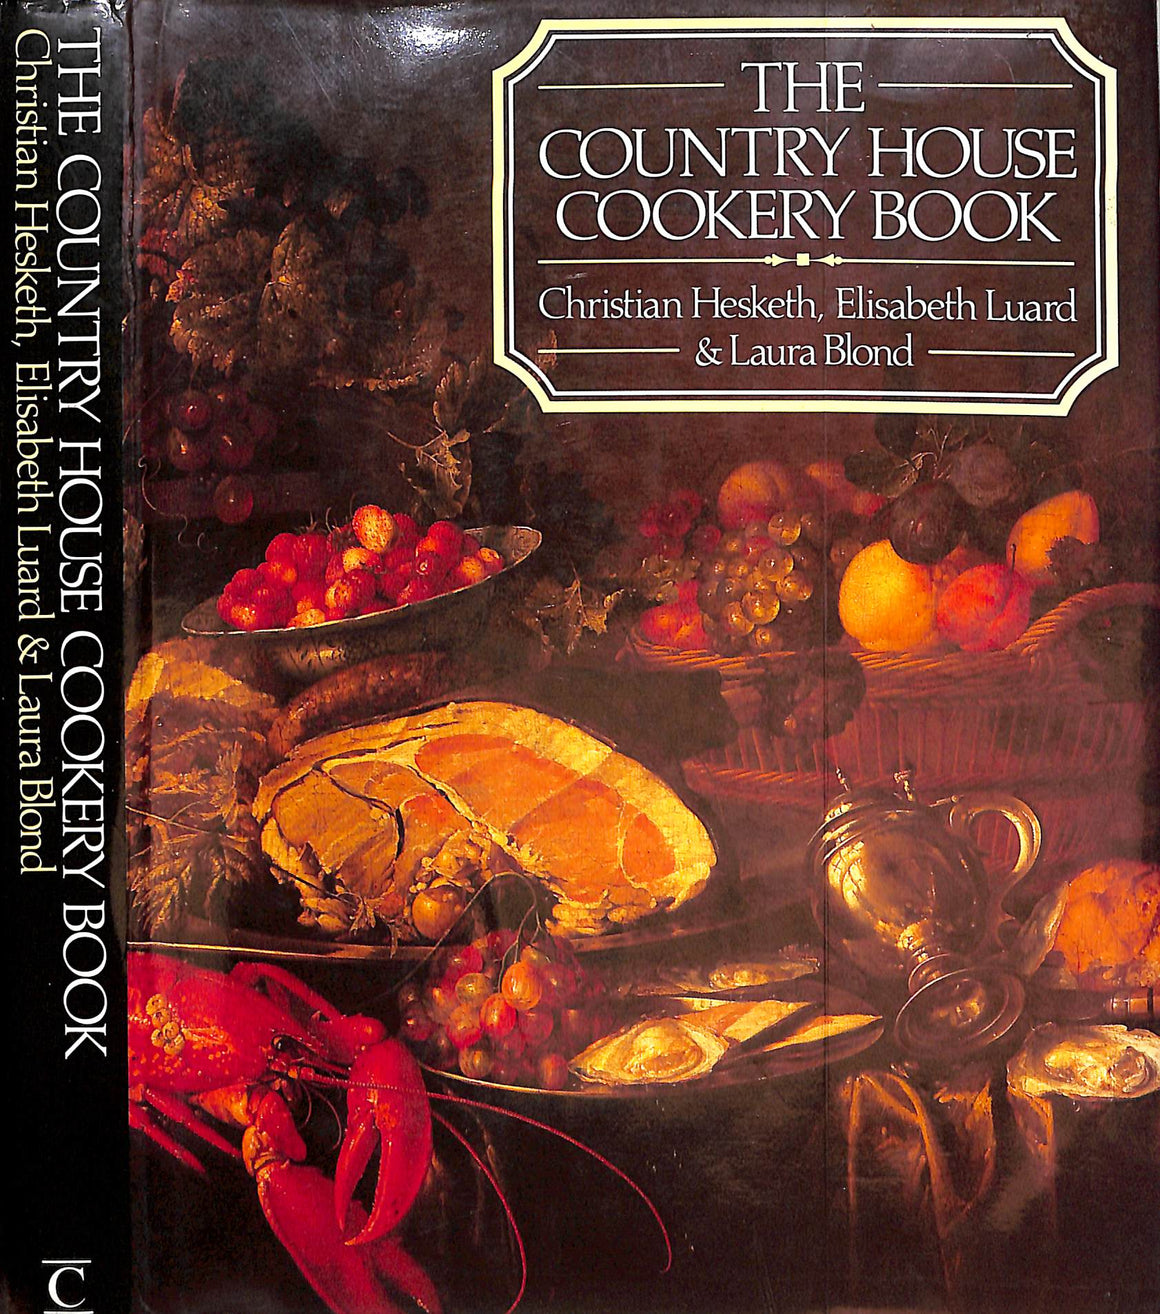 "The Country House Cookery Book" 1985 HESKETH, Christian, LUARD, Elisabeth & BLOND, Laura